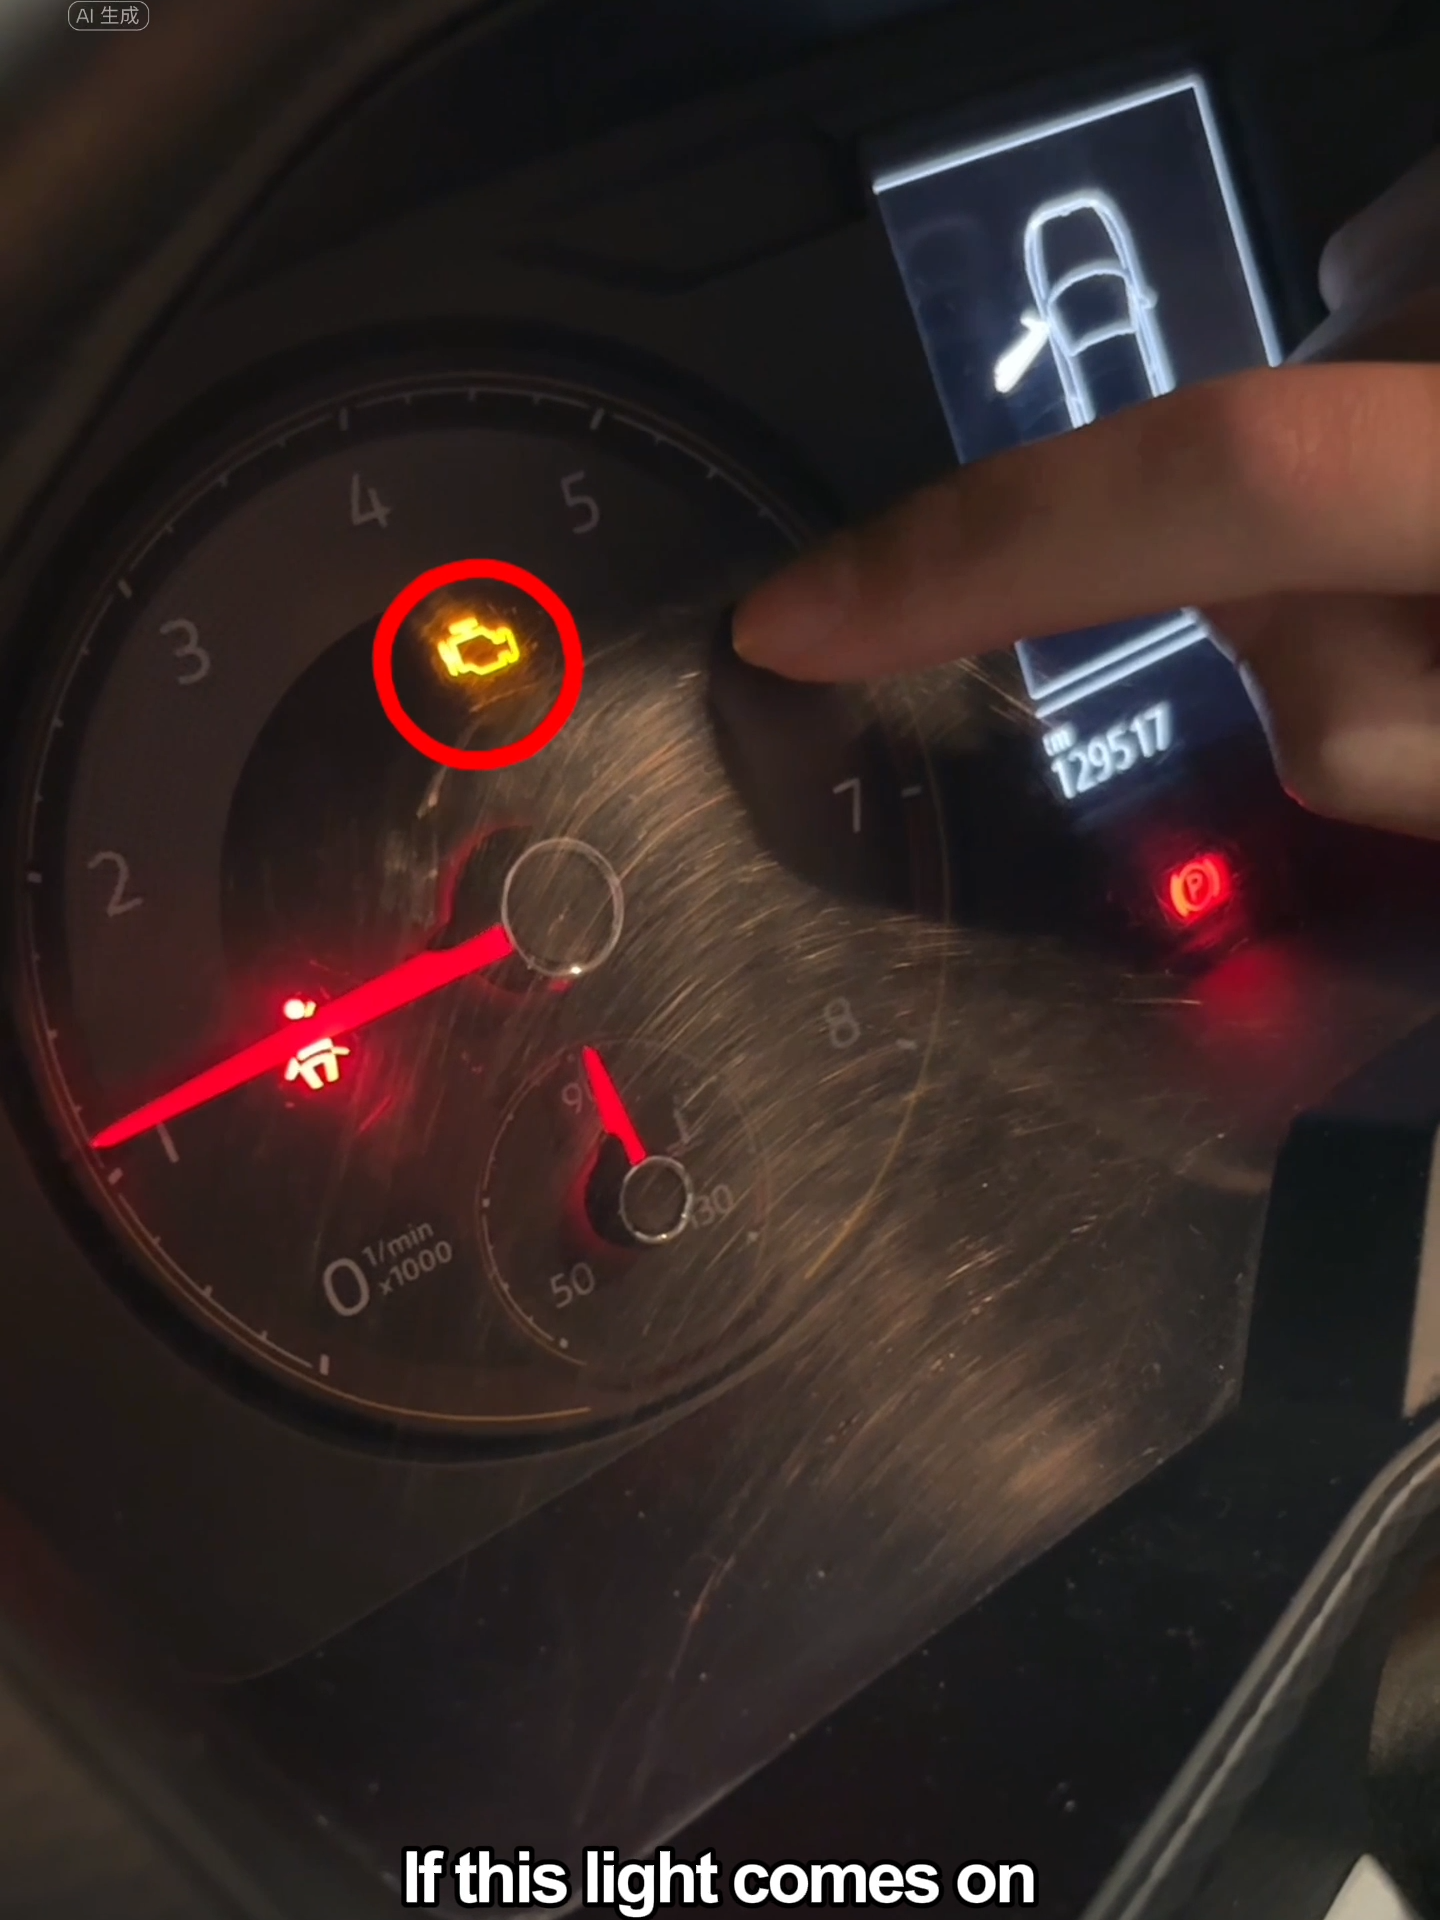 Release the negative terminal of the battery for 10 seconds and the engine fault light will go out #carsafety #tips #skills #car #carsoft #manual